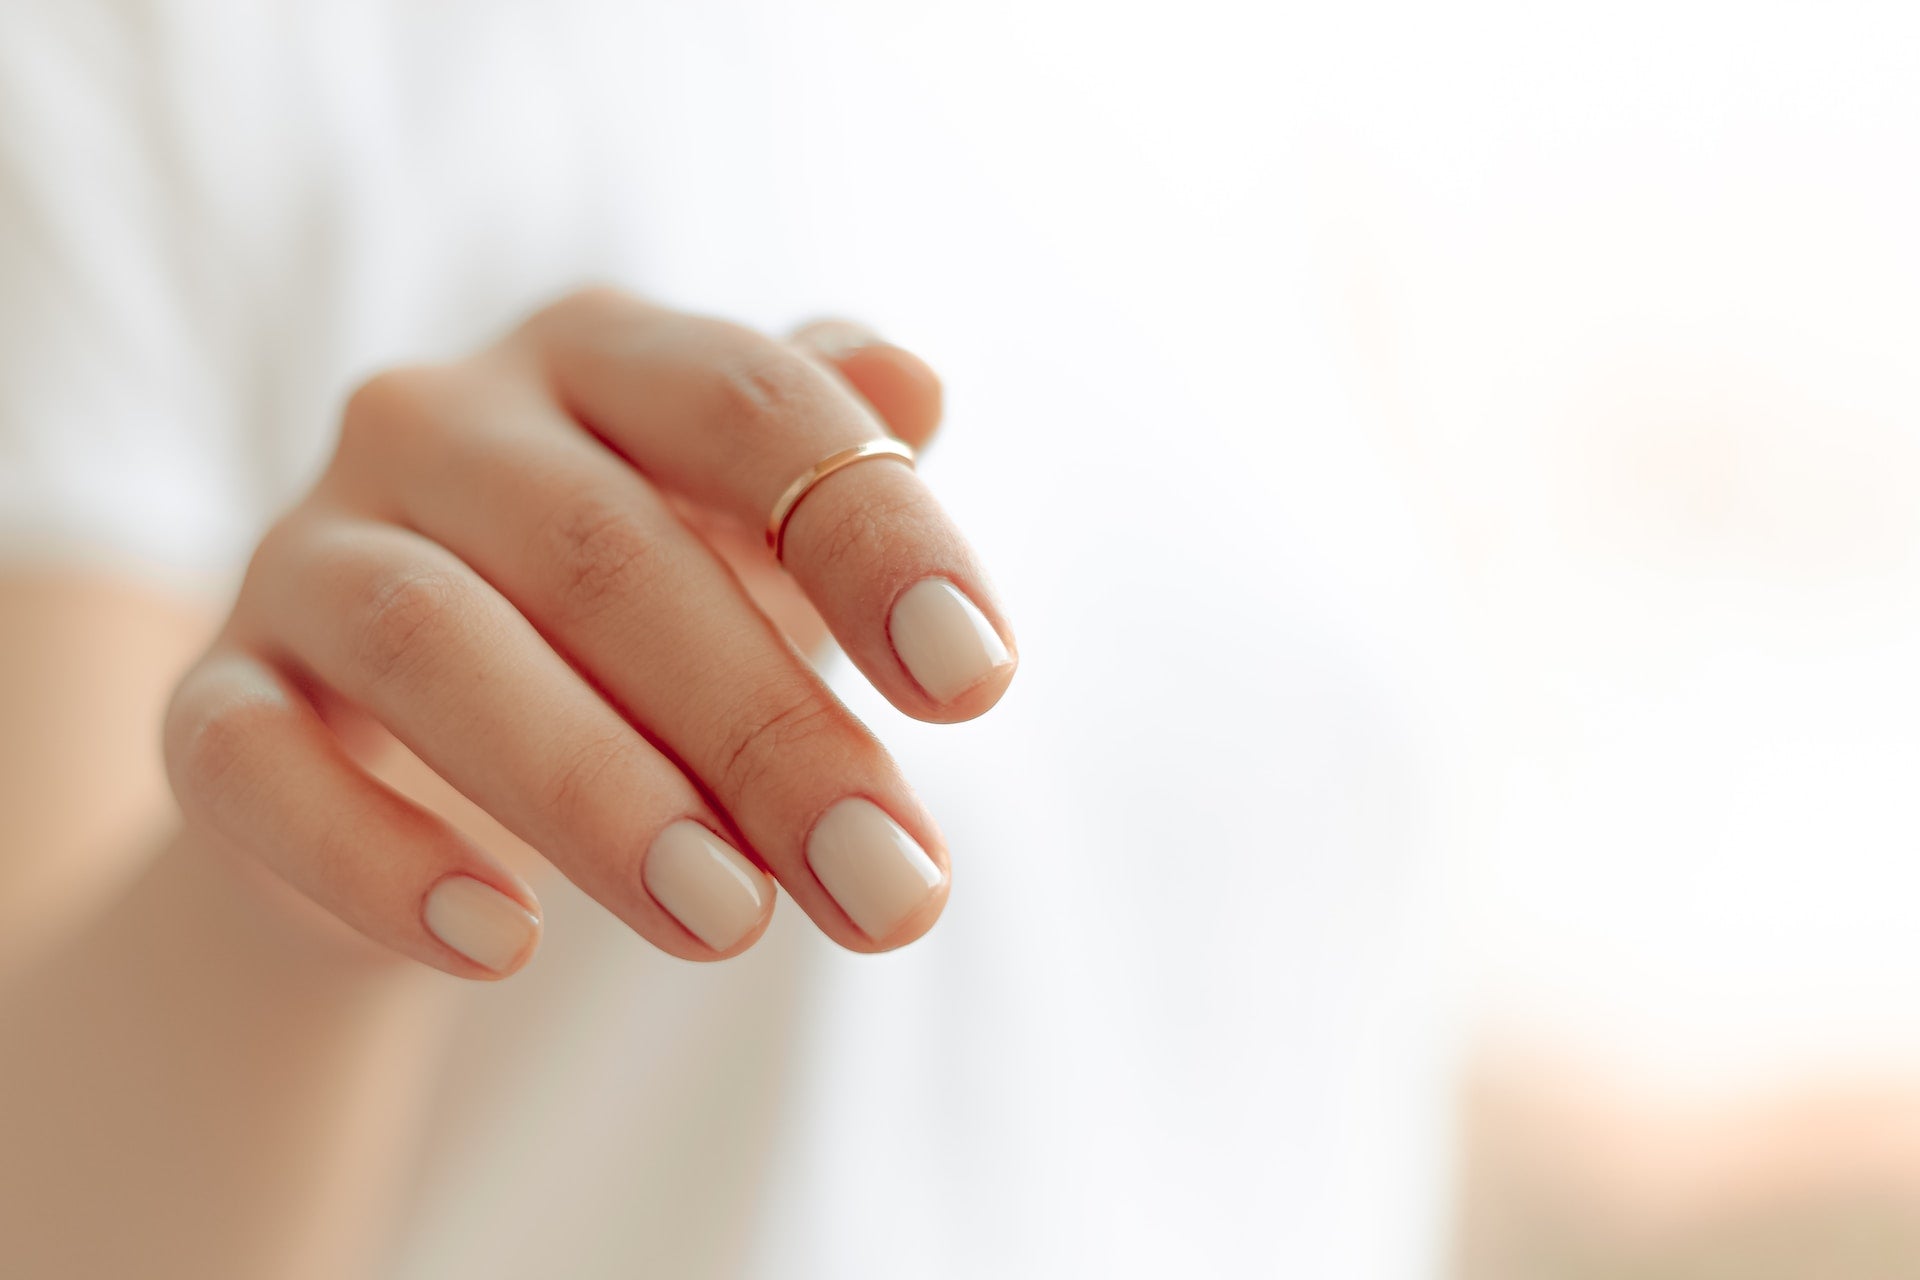 Hands With Pale Nude Nails and Dainty Ring